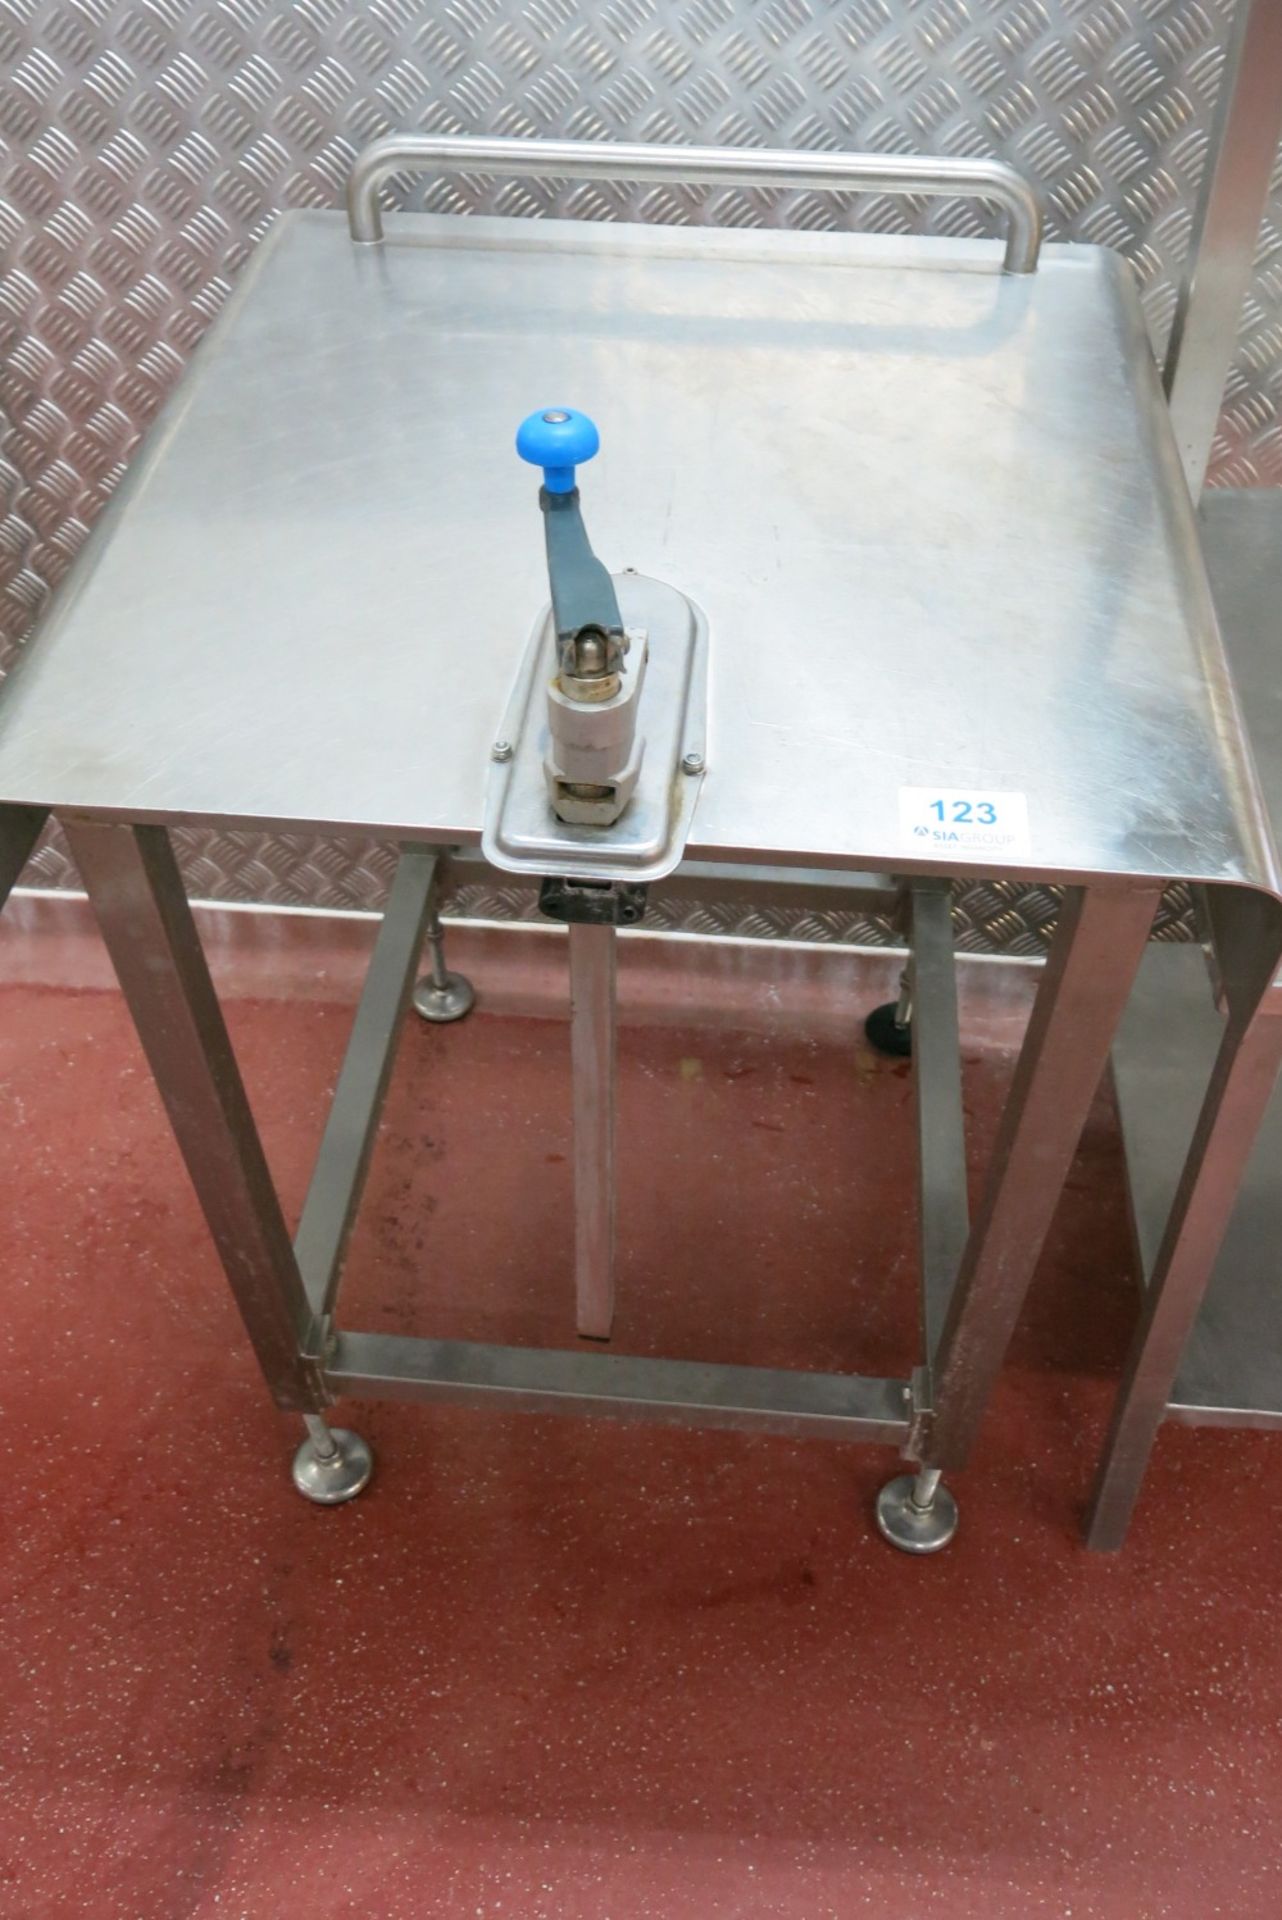 Stainless steel table with manual can opener